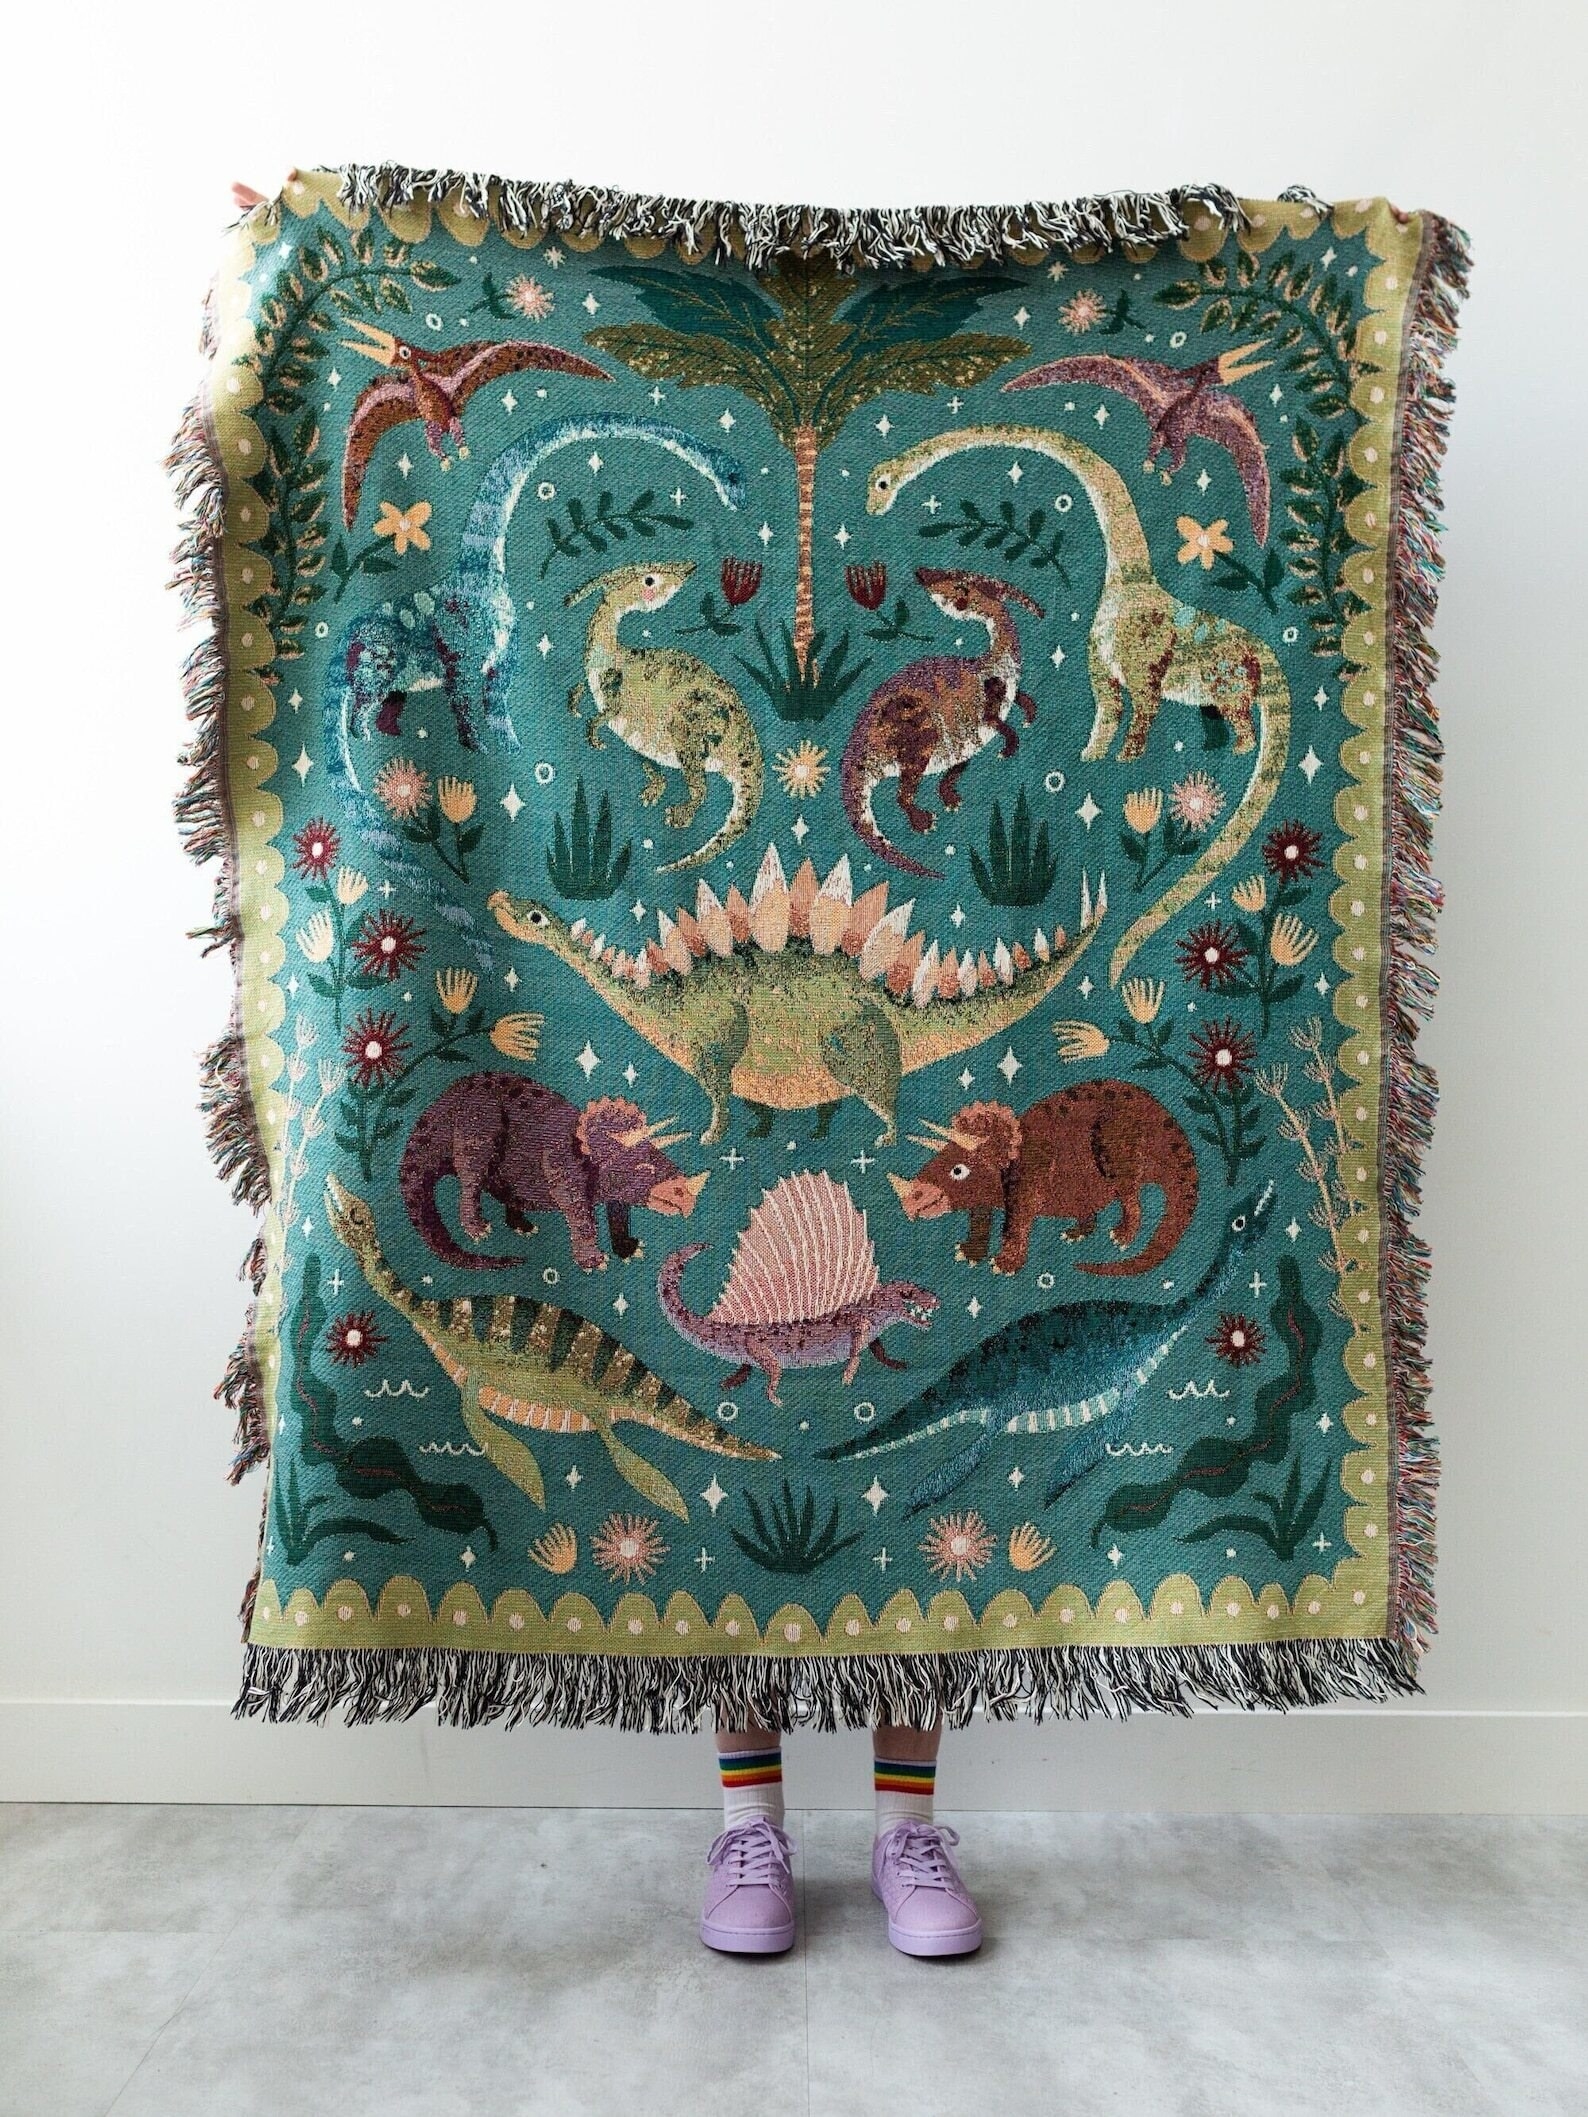 woven tasseled blanket with several different types of dinosaurs on the front